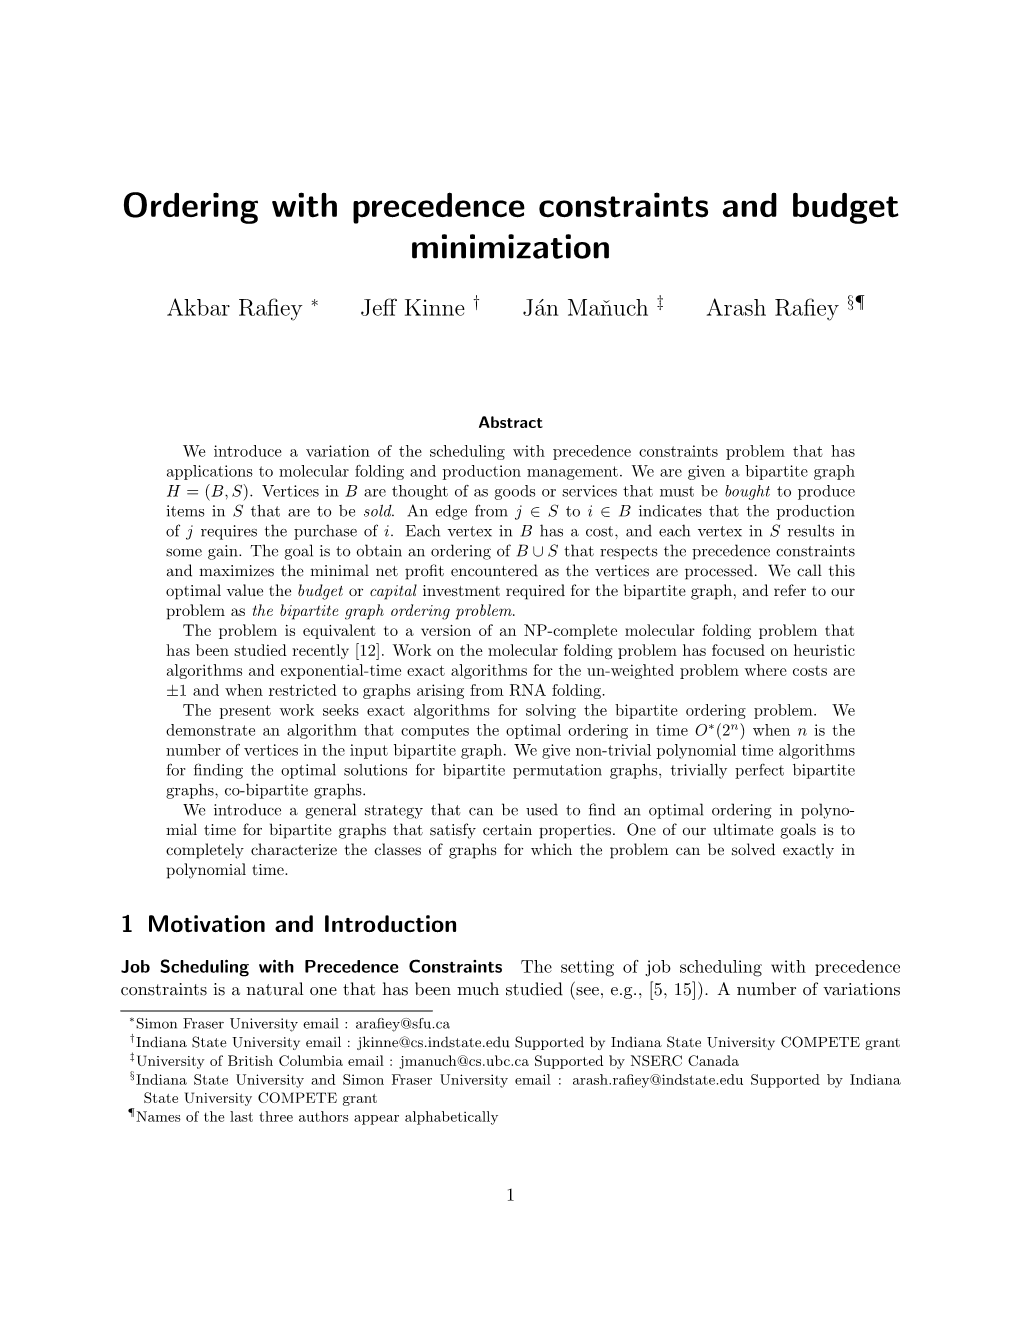 Ordering with Precedence Constraints and Budget Minimization